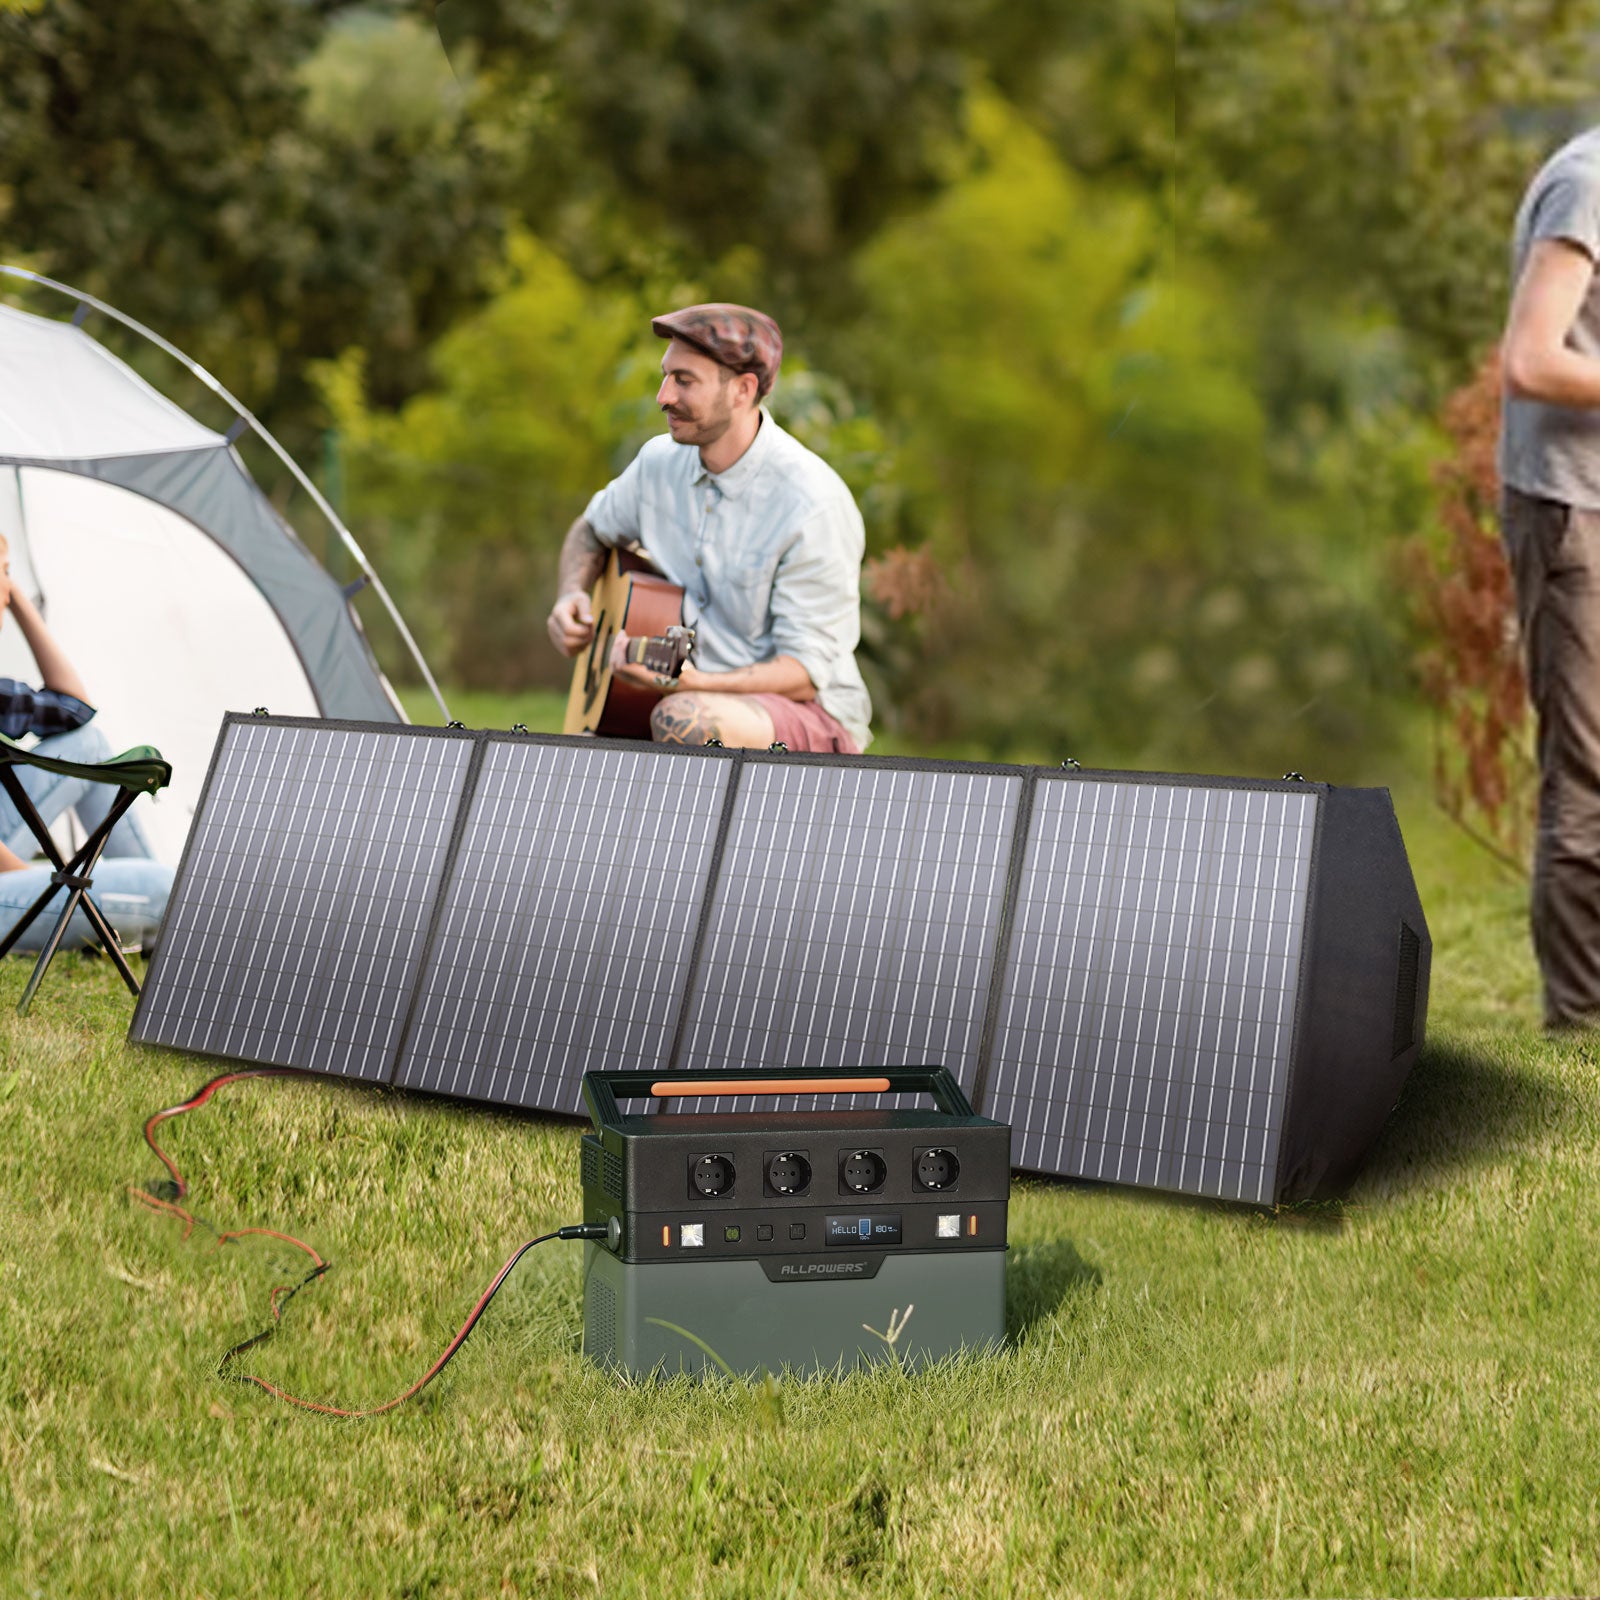 ALLPOWERS Portable solar Power Station 700W / 1500W Outdoor Generators, 110 / 230V Battery Backup With Mobile 200W Solarpanel